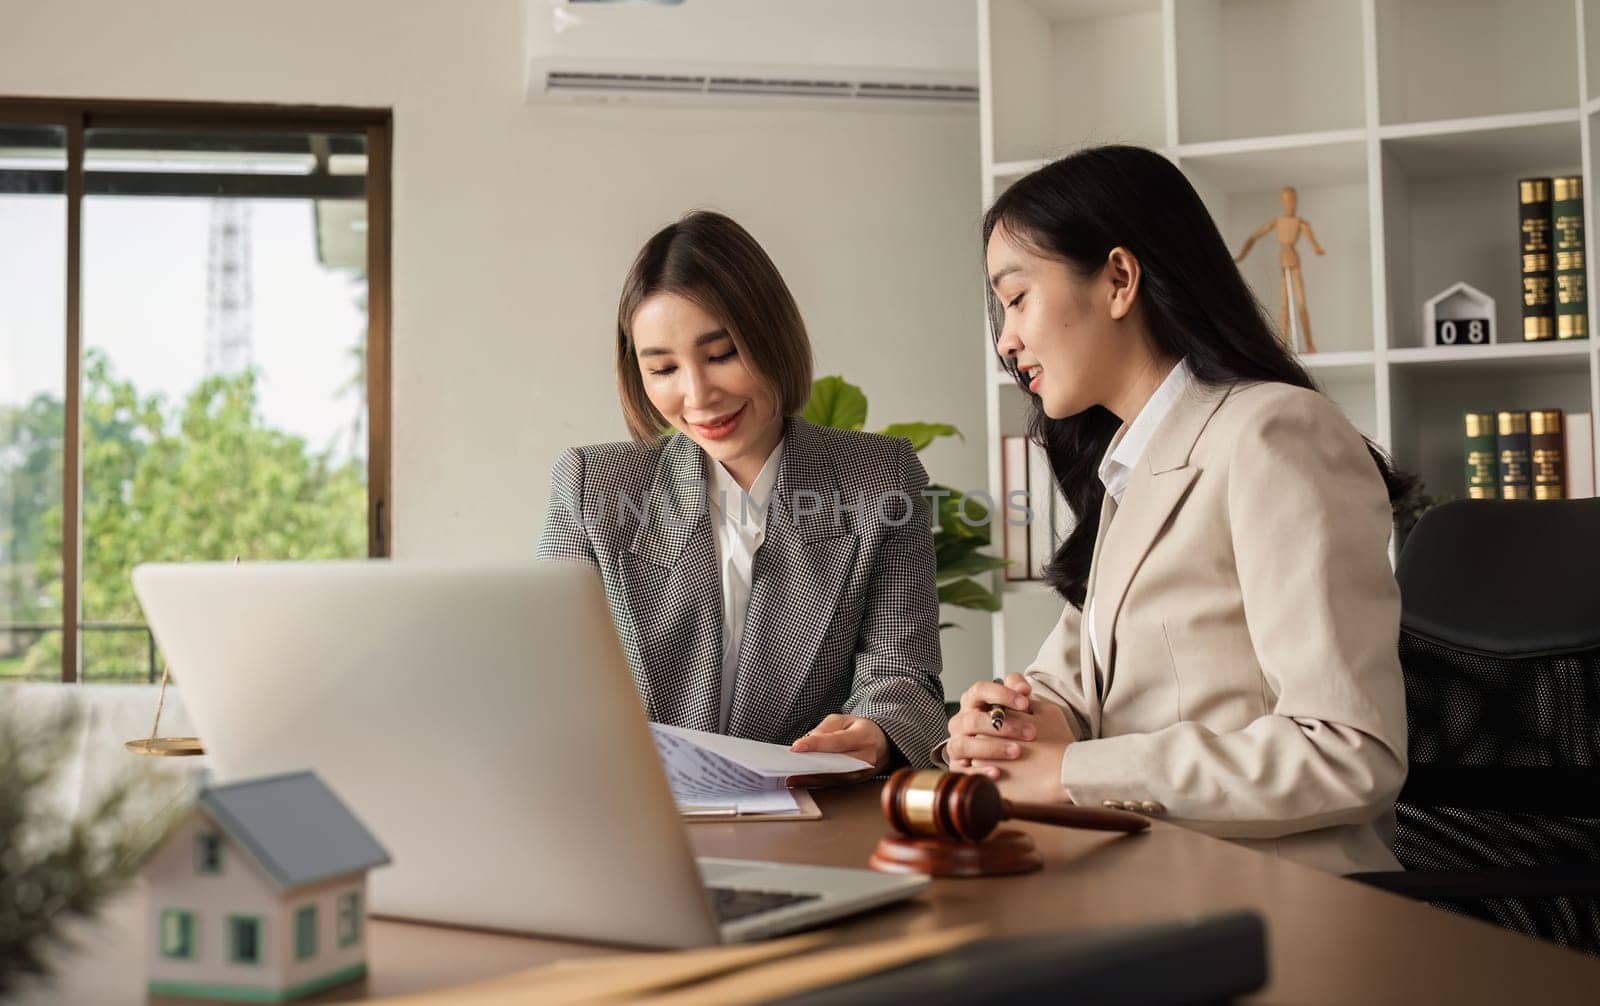 Lawyer and businesswoman signing a business contract regarding real estate law and property protection law Signing an insurance or financial contract.